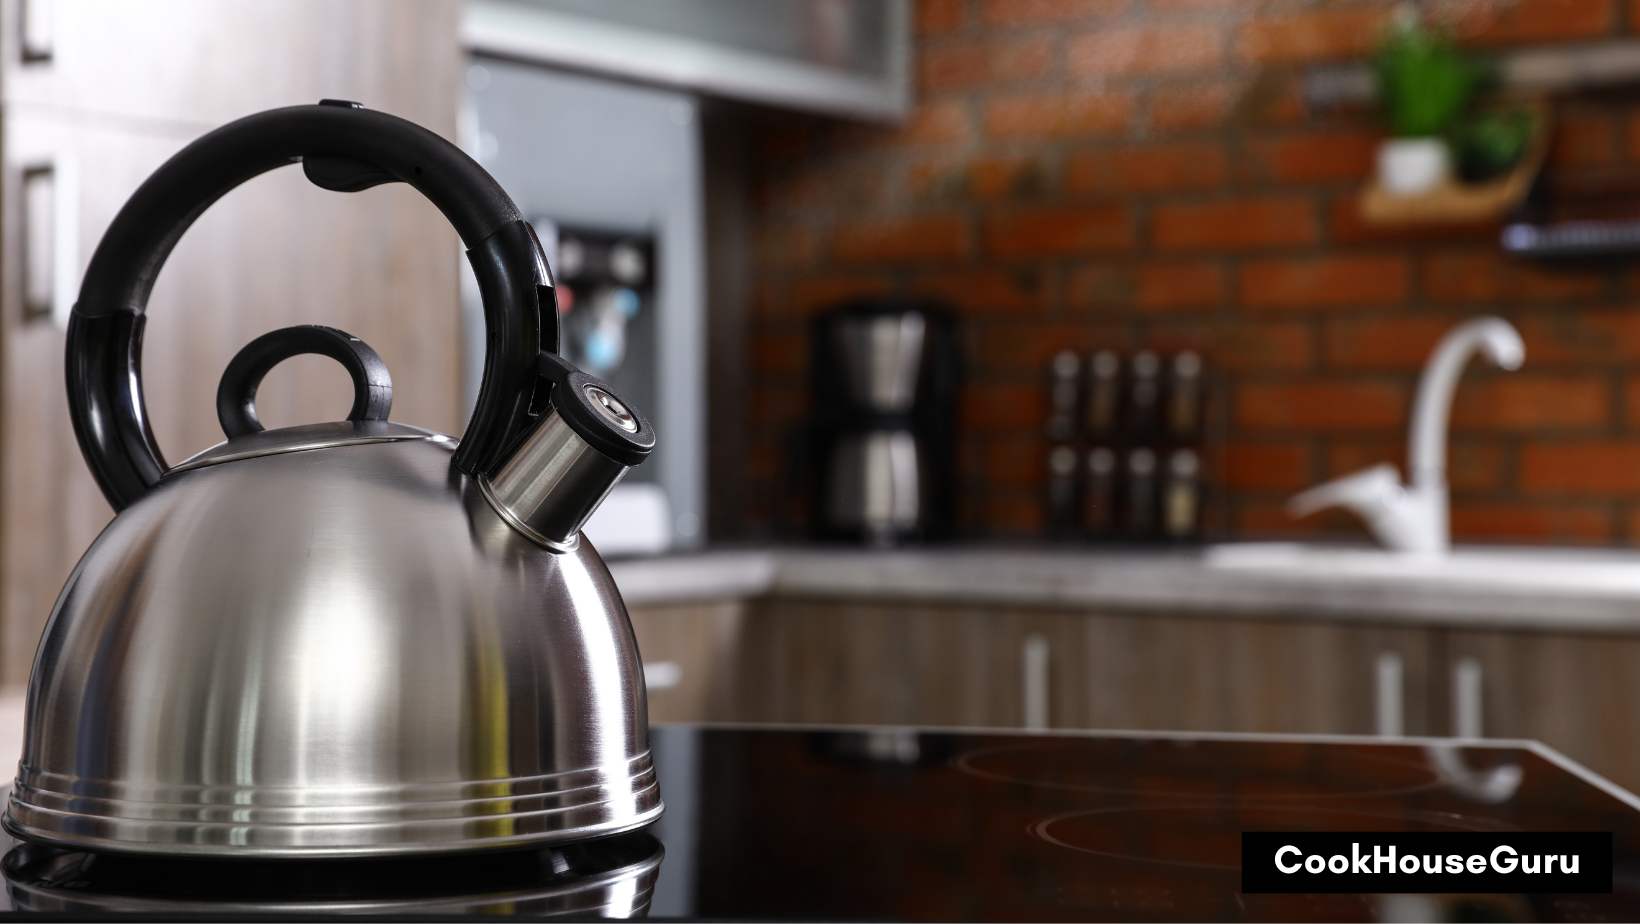 How to Fix Whistle on Tea Kettle